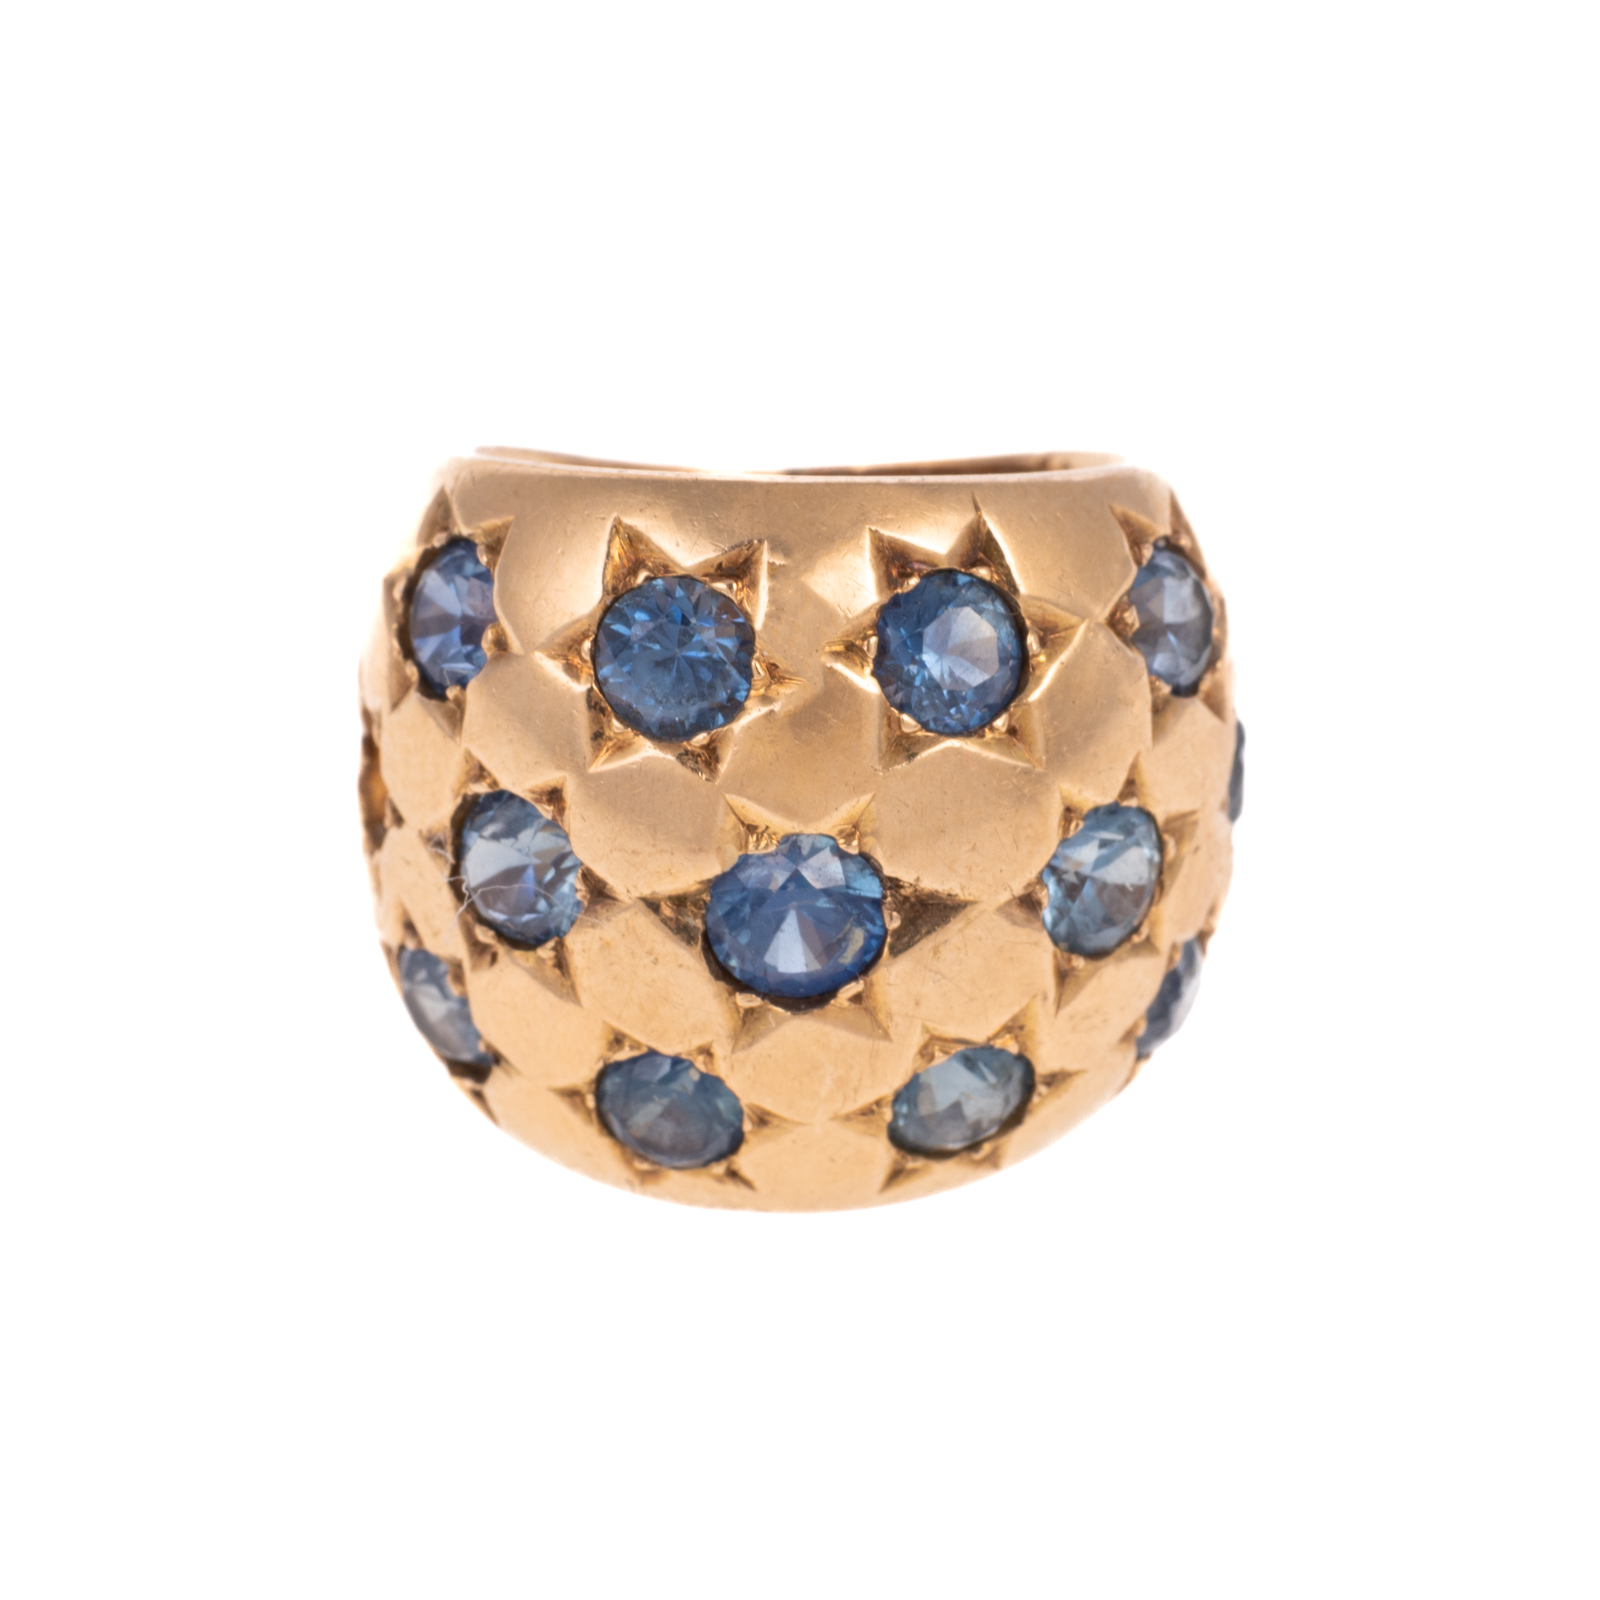 A WIDE DOMED RETRO SAPPHIRE RING